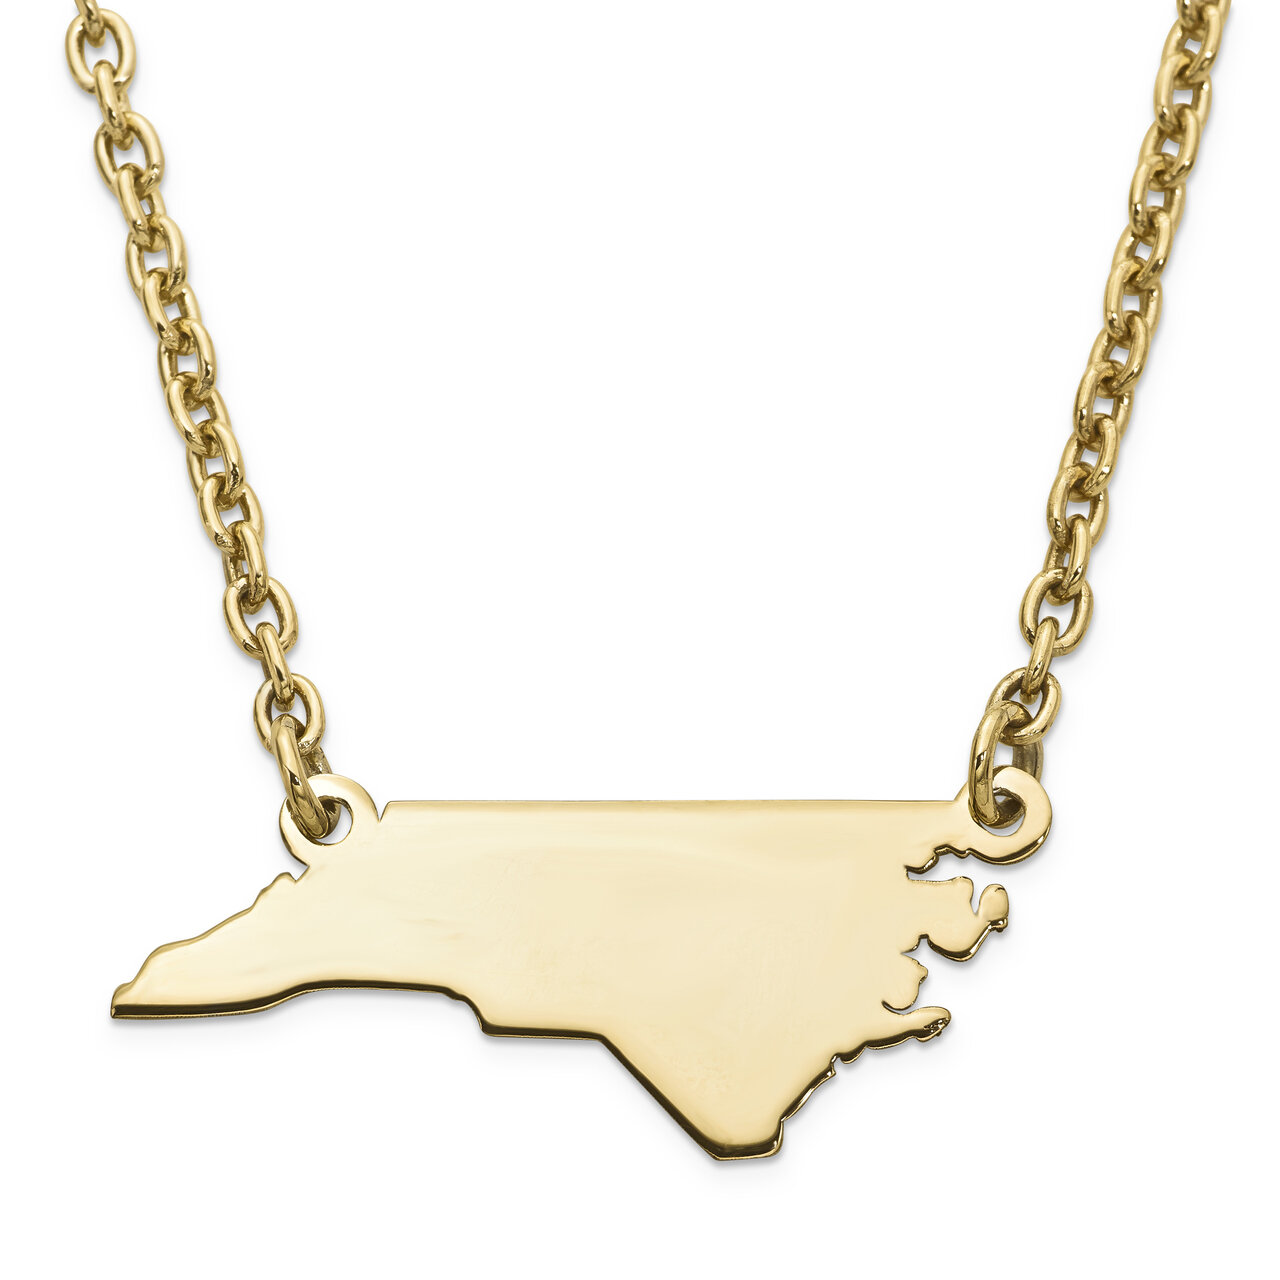 North Carolina State Pendant Necklace with Chain 14k Yellow Gold Engravable XNA706Y-NC